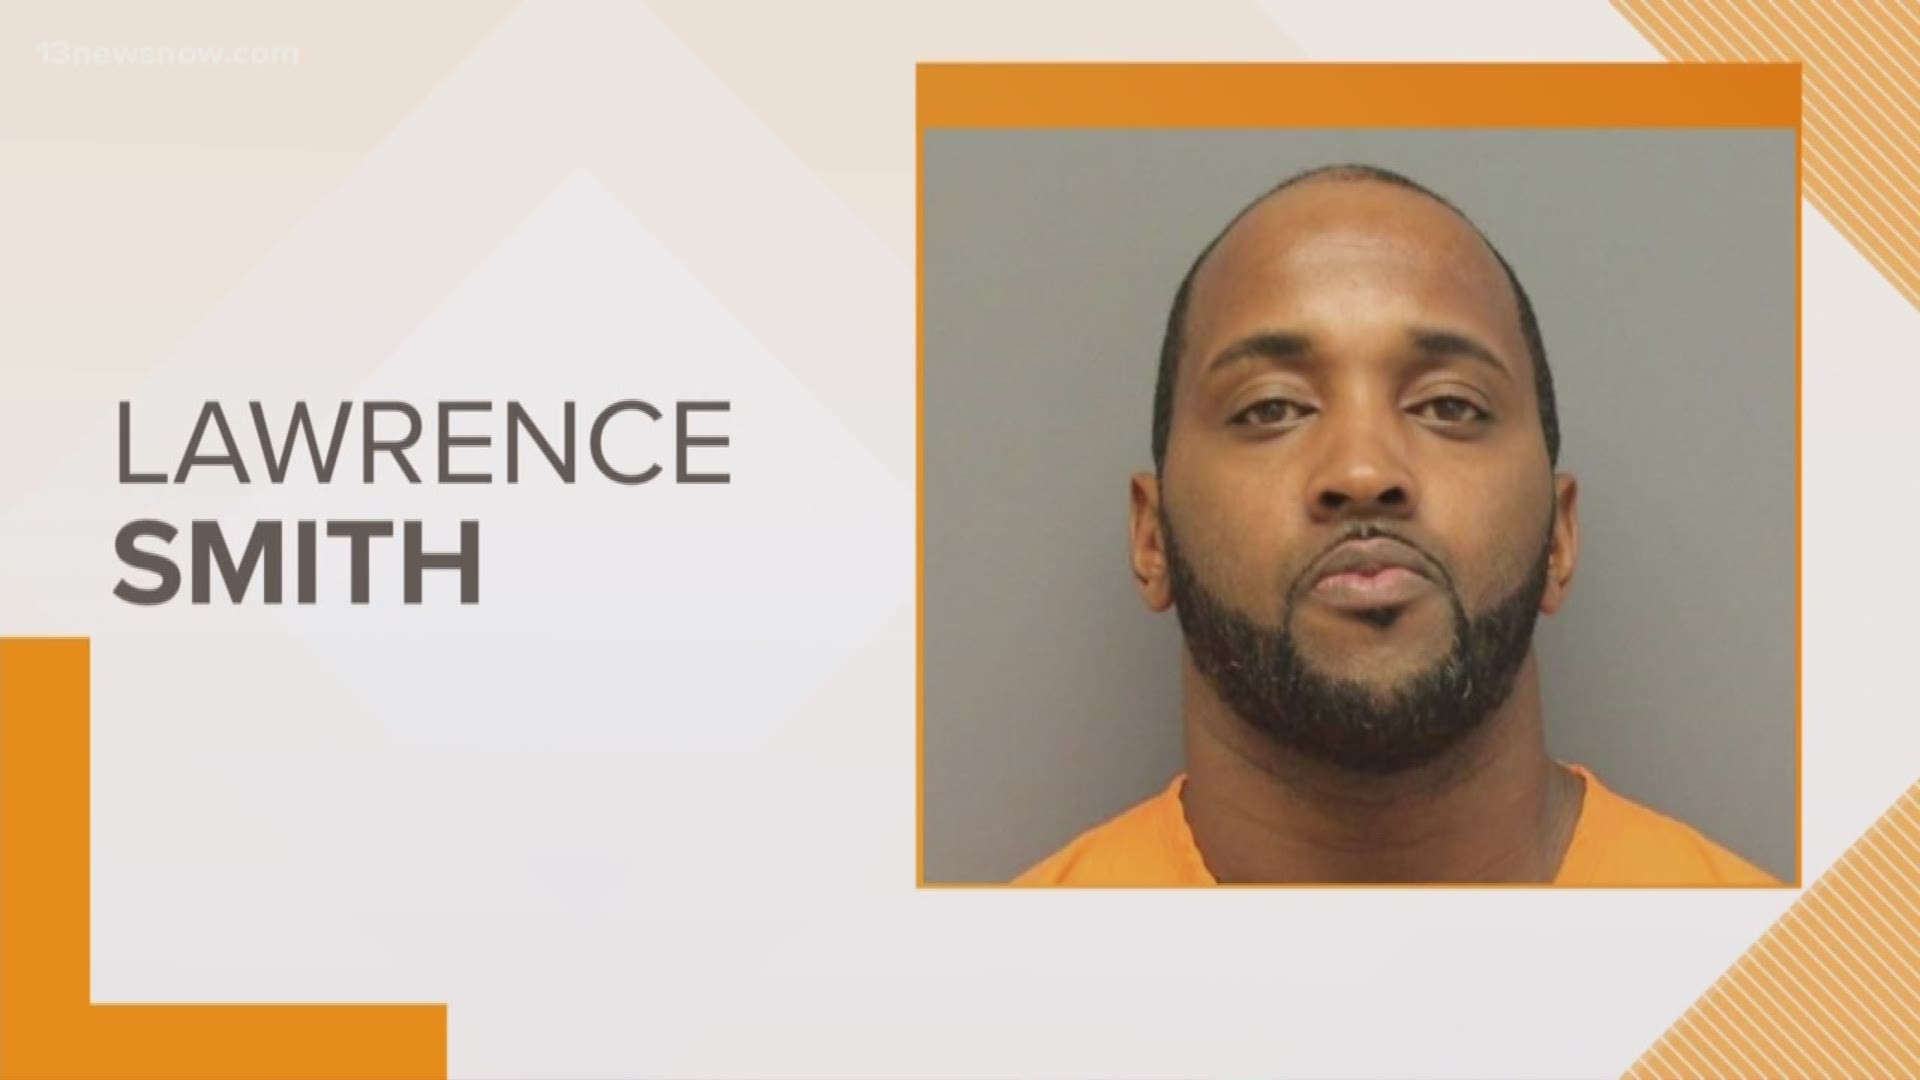 Lawrence Smith is accused of murdering Laquita Ball on April 2, 2018.